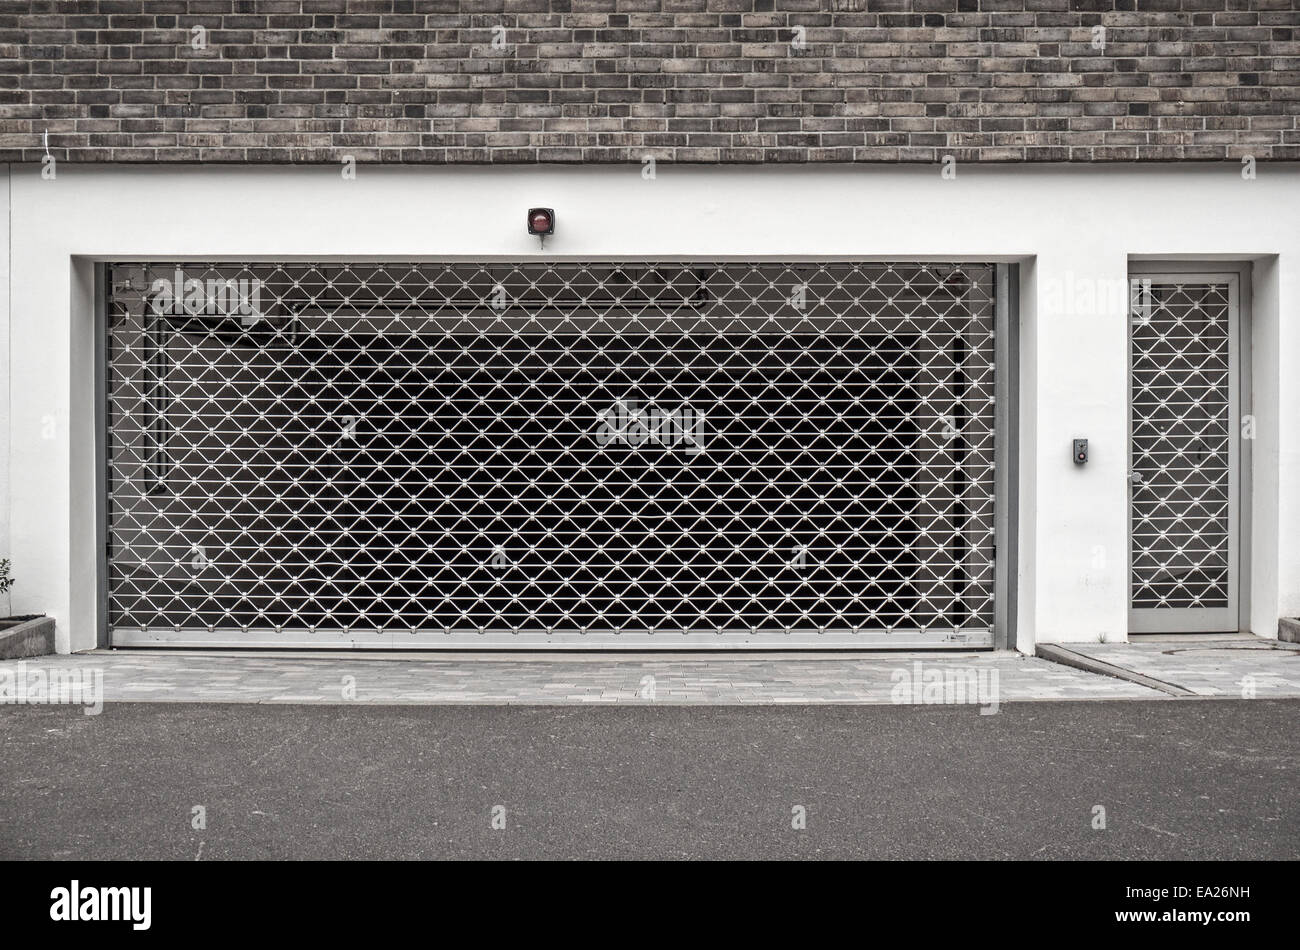 Entrance of a parking garage, closed with a barred gate. Stock Photo